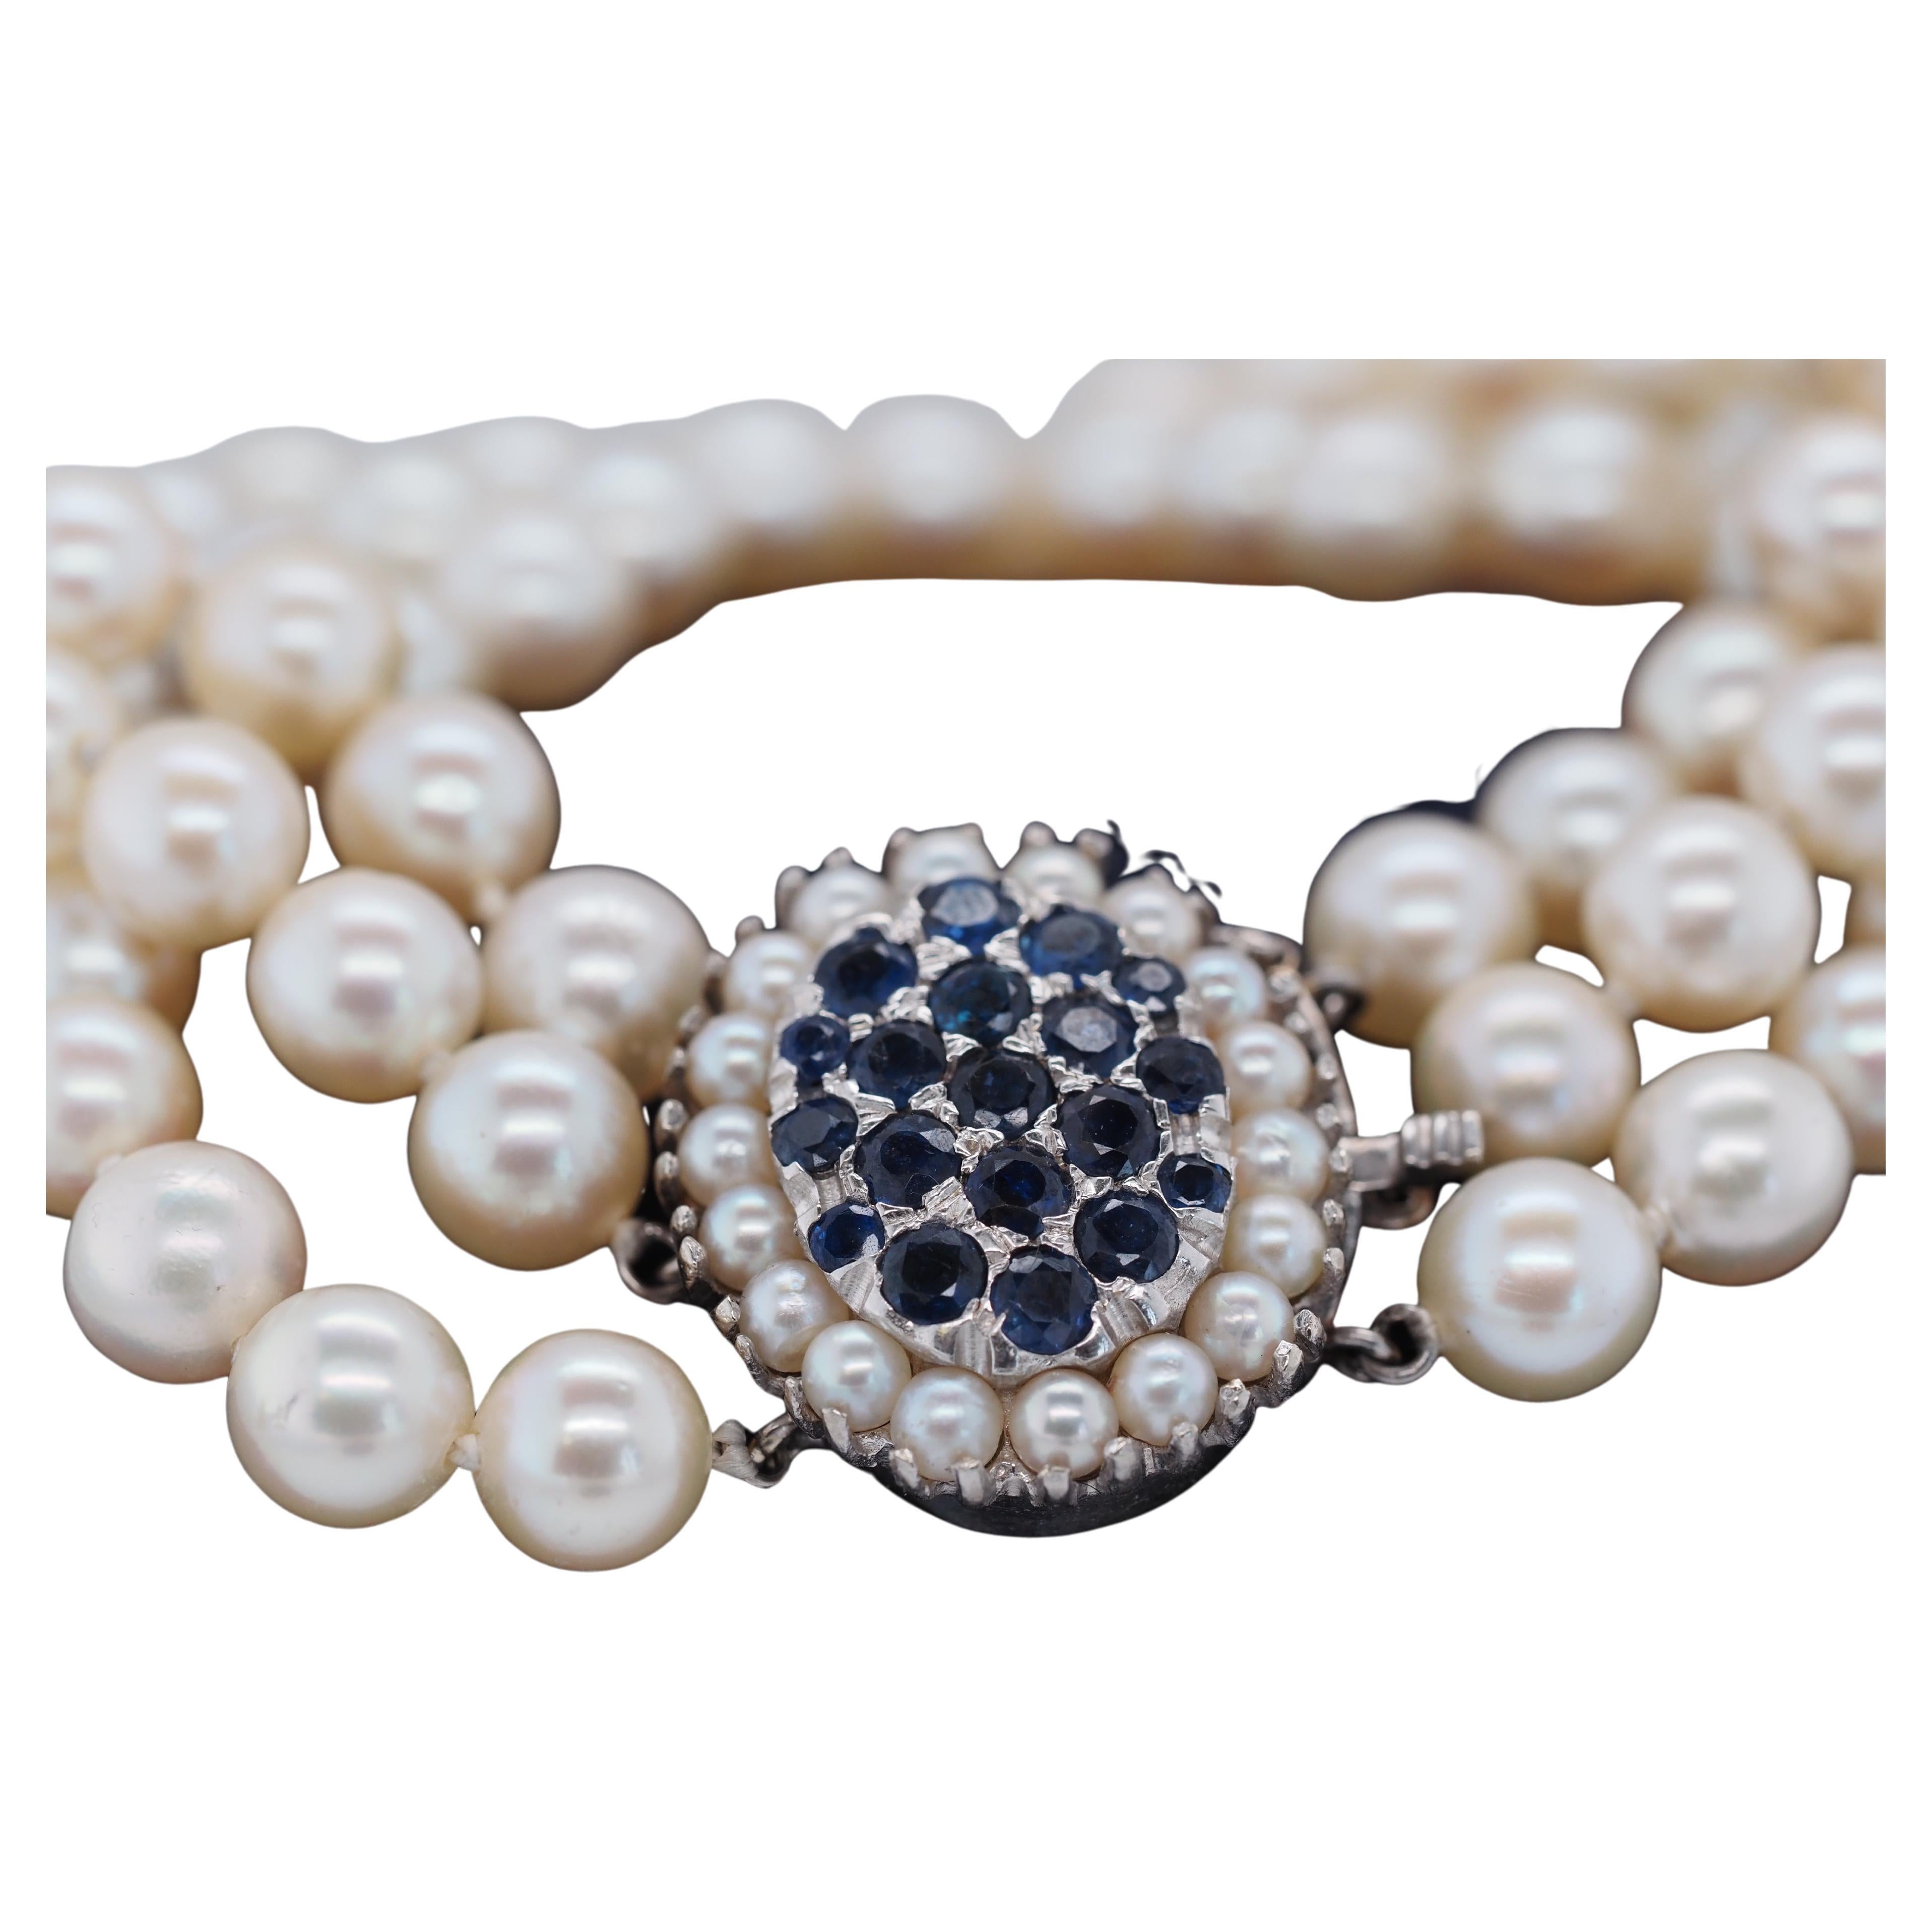 1960s 14k White Gold Pearl Bracelet with Natural Sapphires